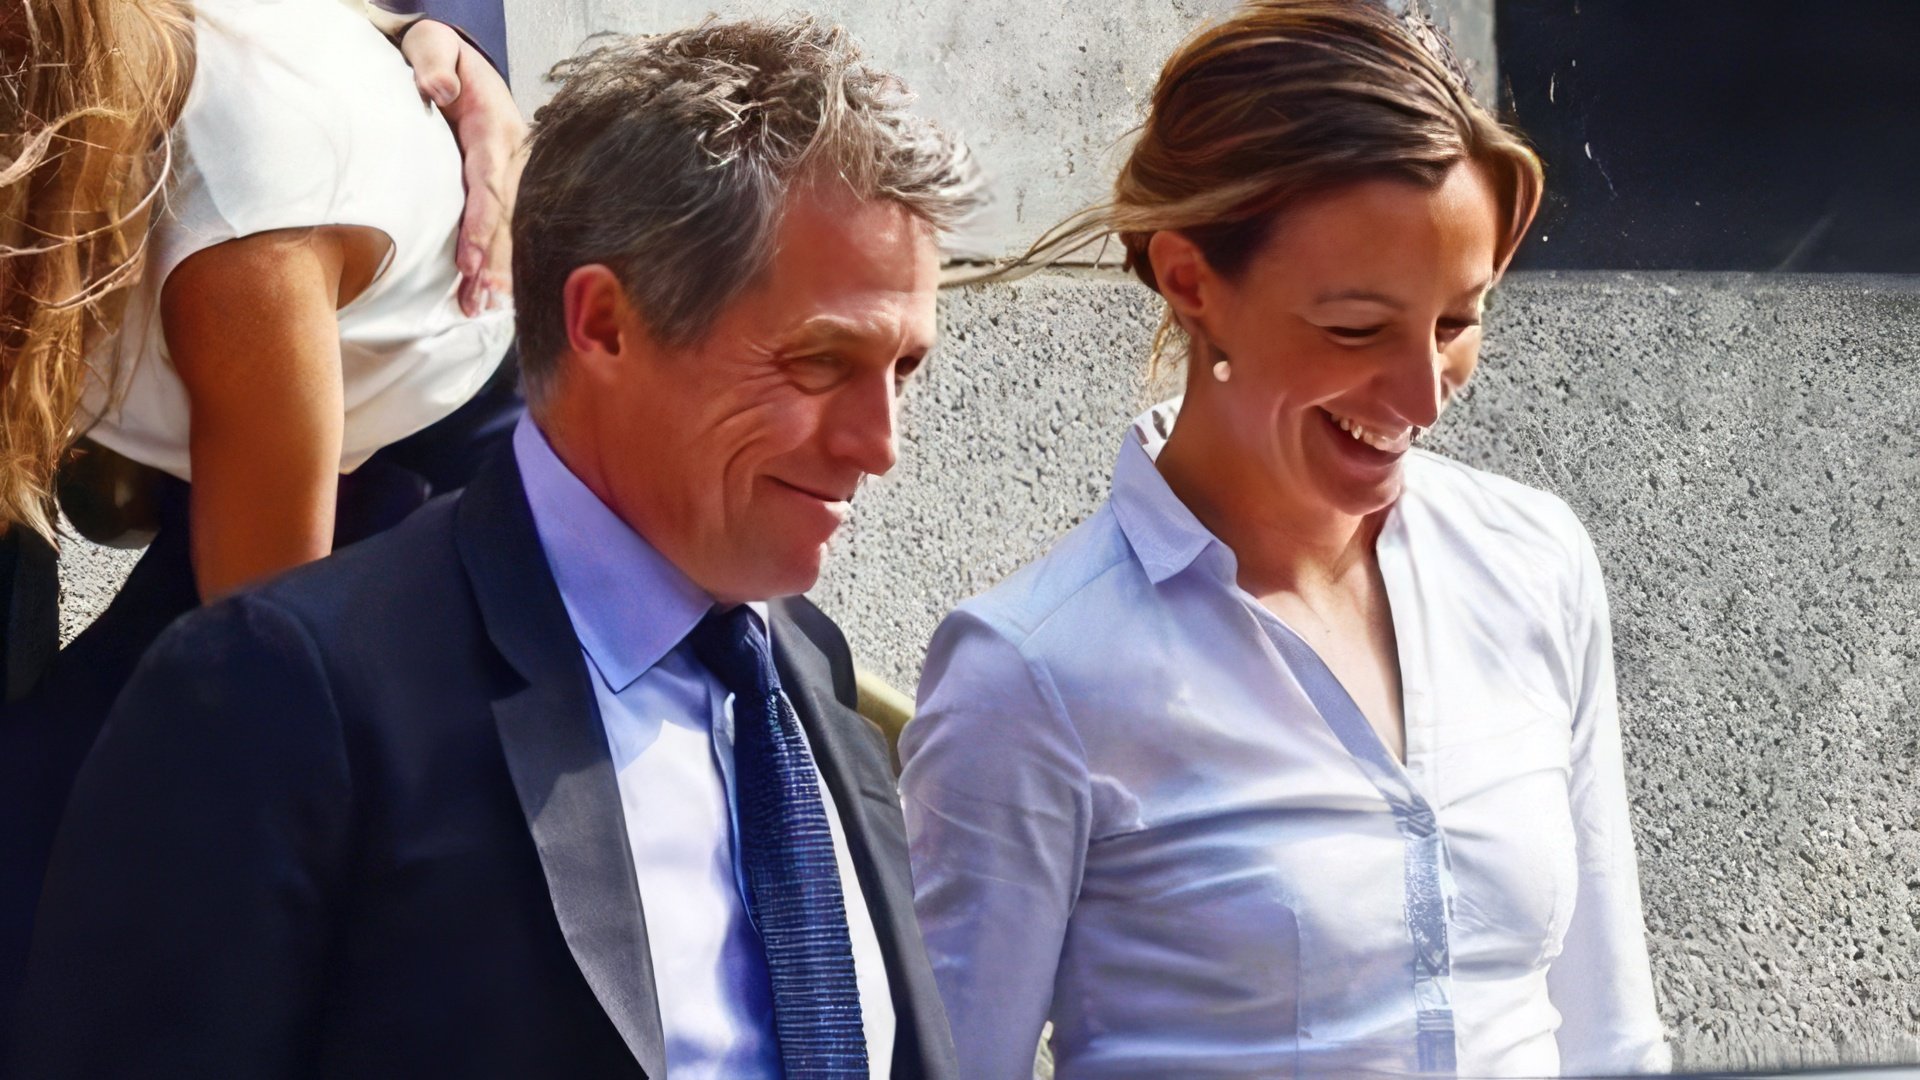 Hugh Grant and Anna Eberstein got married in May 2018